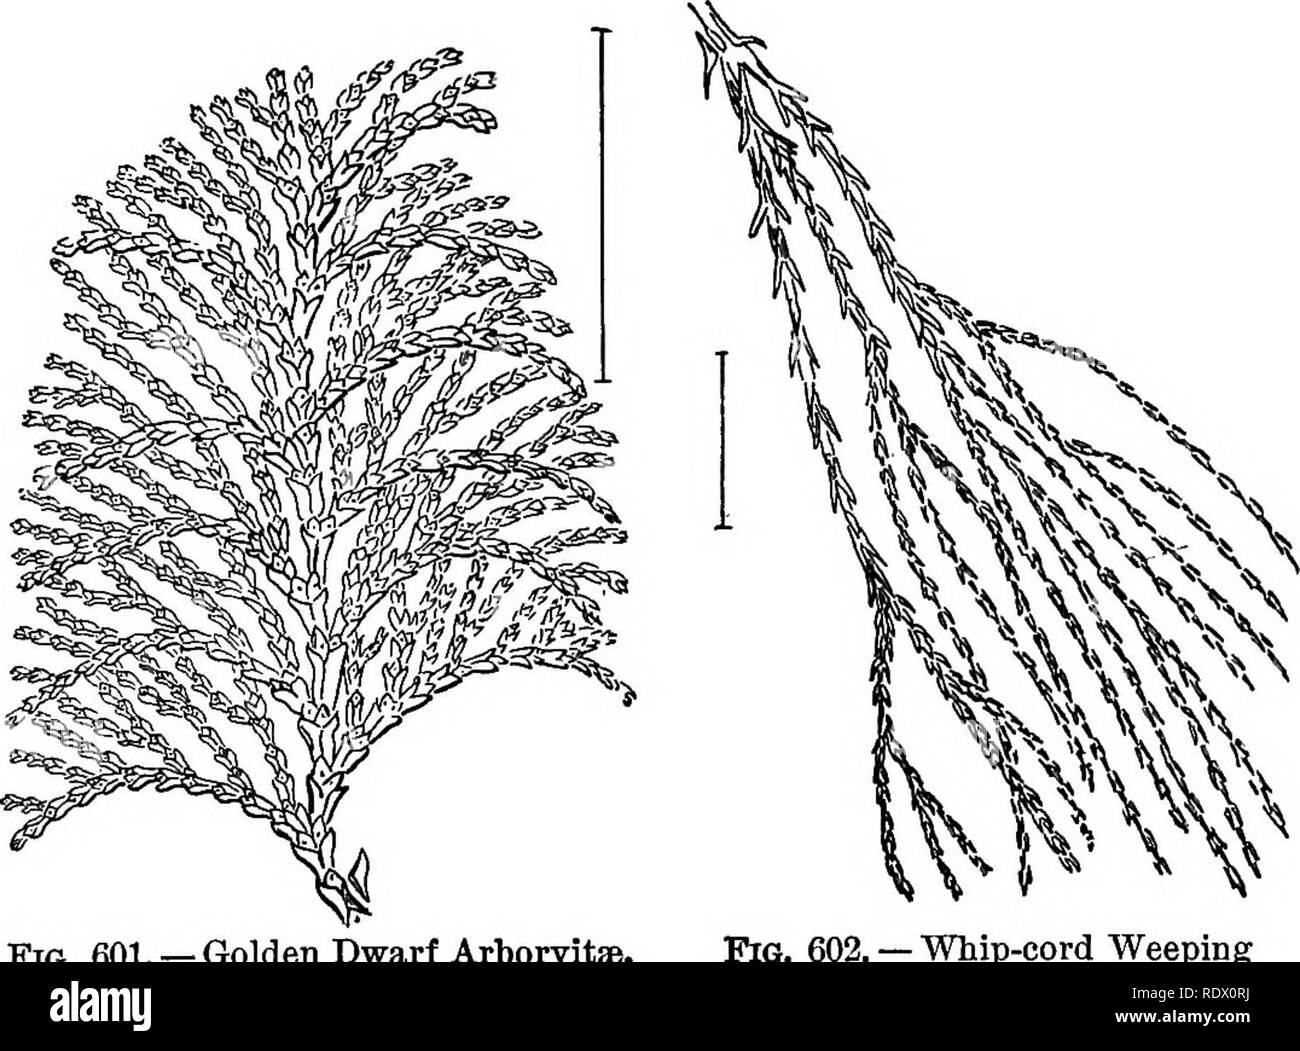 . Ornamental shrubs of the United States (hardy, cultivated). Shrubs. ARBORVIT^ 333 lasts throughout the year ; Thkead-beanched Aeborvit^ — filiformis strfcta—is a round-headed dwarf bush with upright slender, almost thread-like, branches ; Whipcord Weeping Arbokvitje (602) —p^ndula —is a weeping bush with tufted cord-like branchlets; Junipek-leaveu Arboevitje — decussata — is a bright bluish green low compact rounded form, with linear spreading leaves, similar to ChamsBcyparis squarrbsa, very useful for window boxes. The so-called ' Japanese Eetinosporas ' furnish a number of dwarf forms with Stock Photo